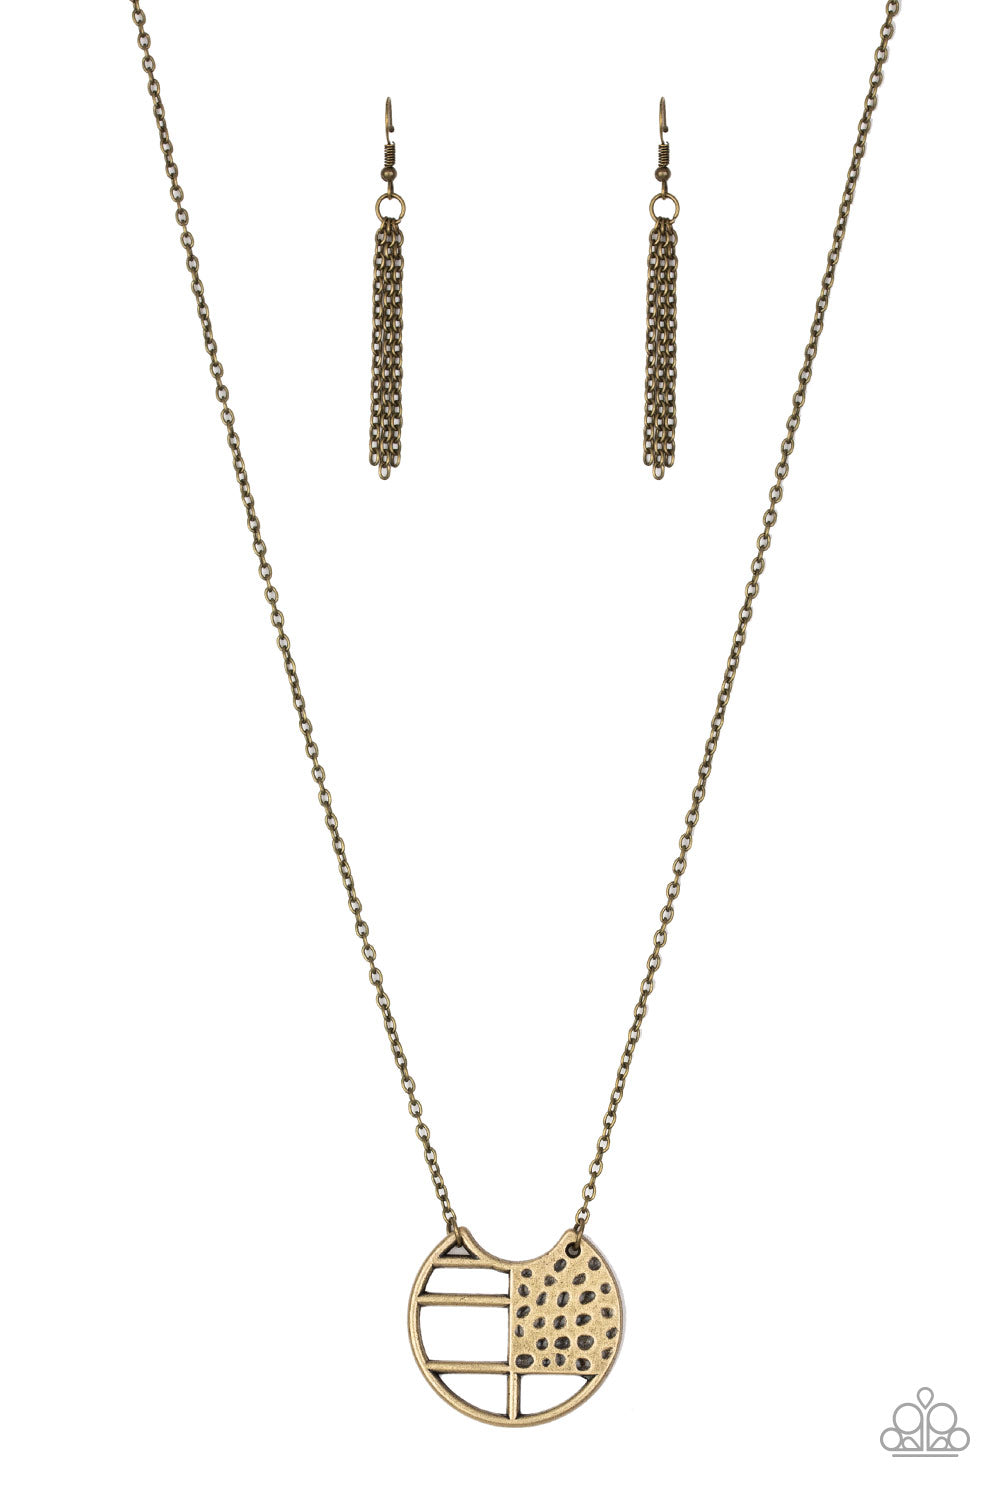 Paparazzi Accessories - Abstract Aztec - Brass - Necklace - Alies Bling Bar